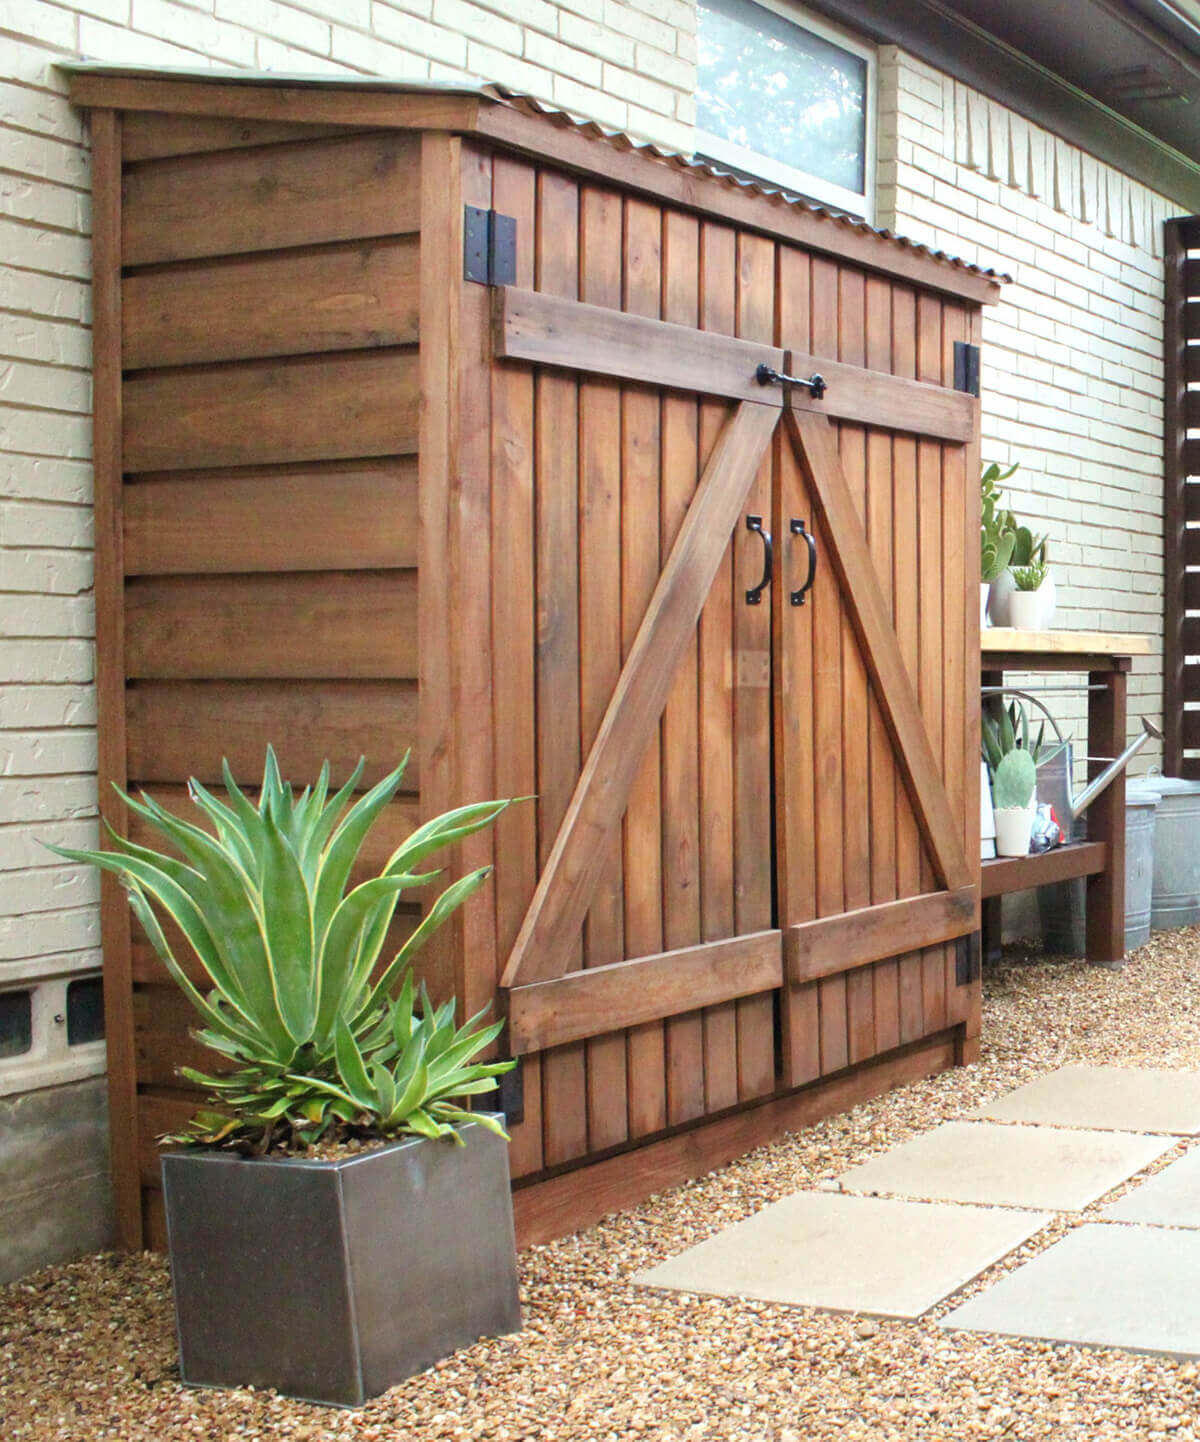 A Wooden Small Storage Shed Ideas